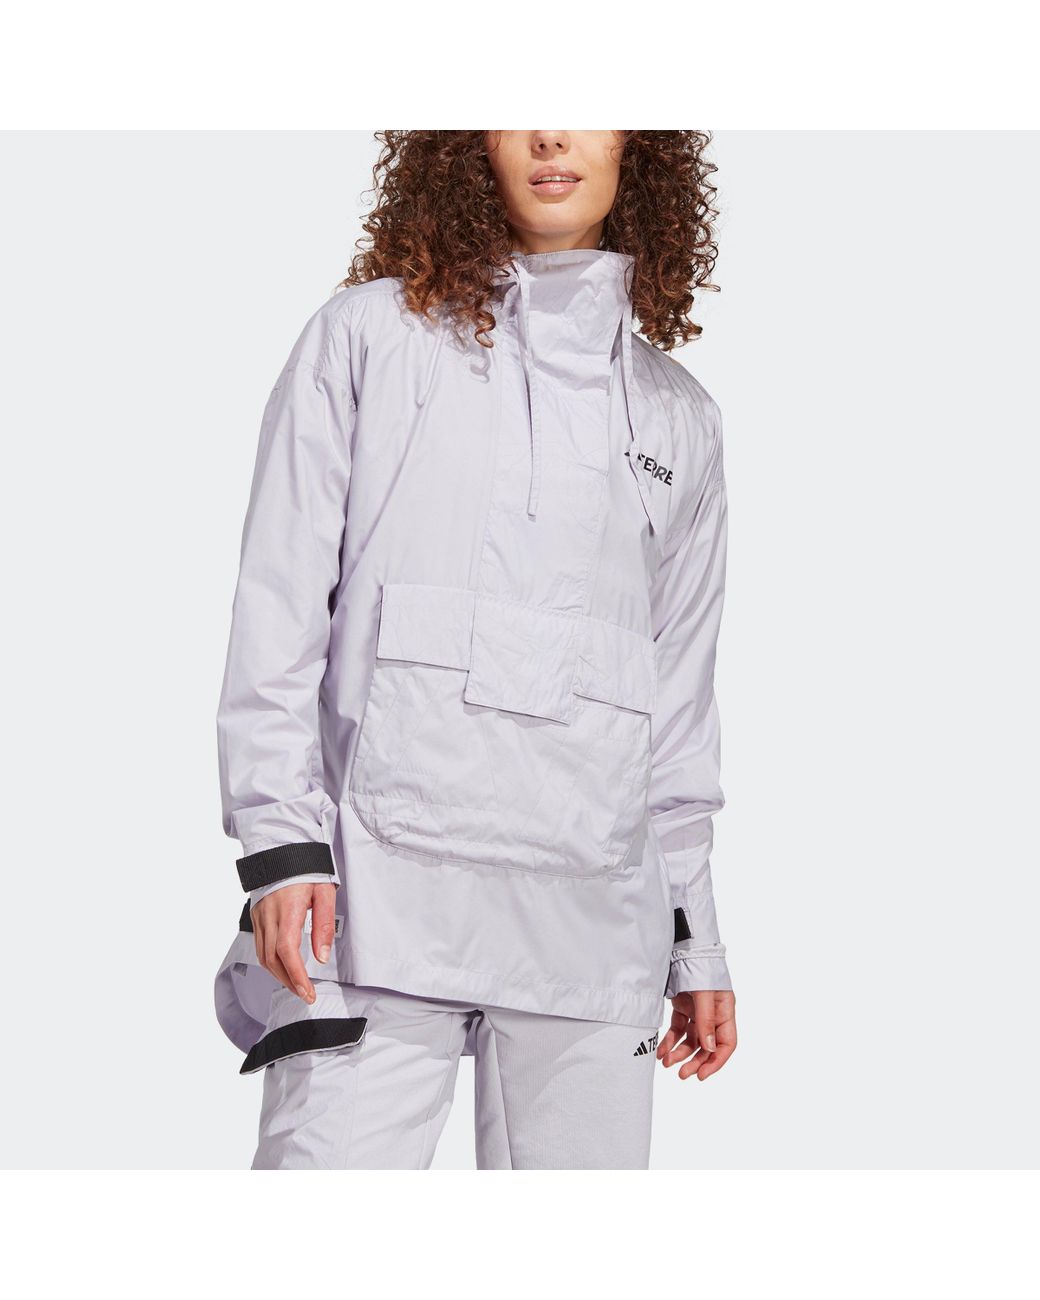 | Wind Lyst Be Terrex adidas Purple in Made Remade To Anorak